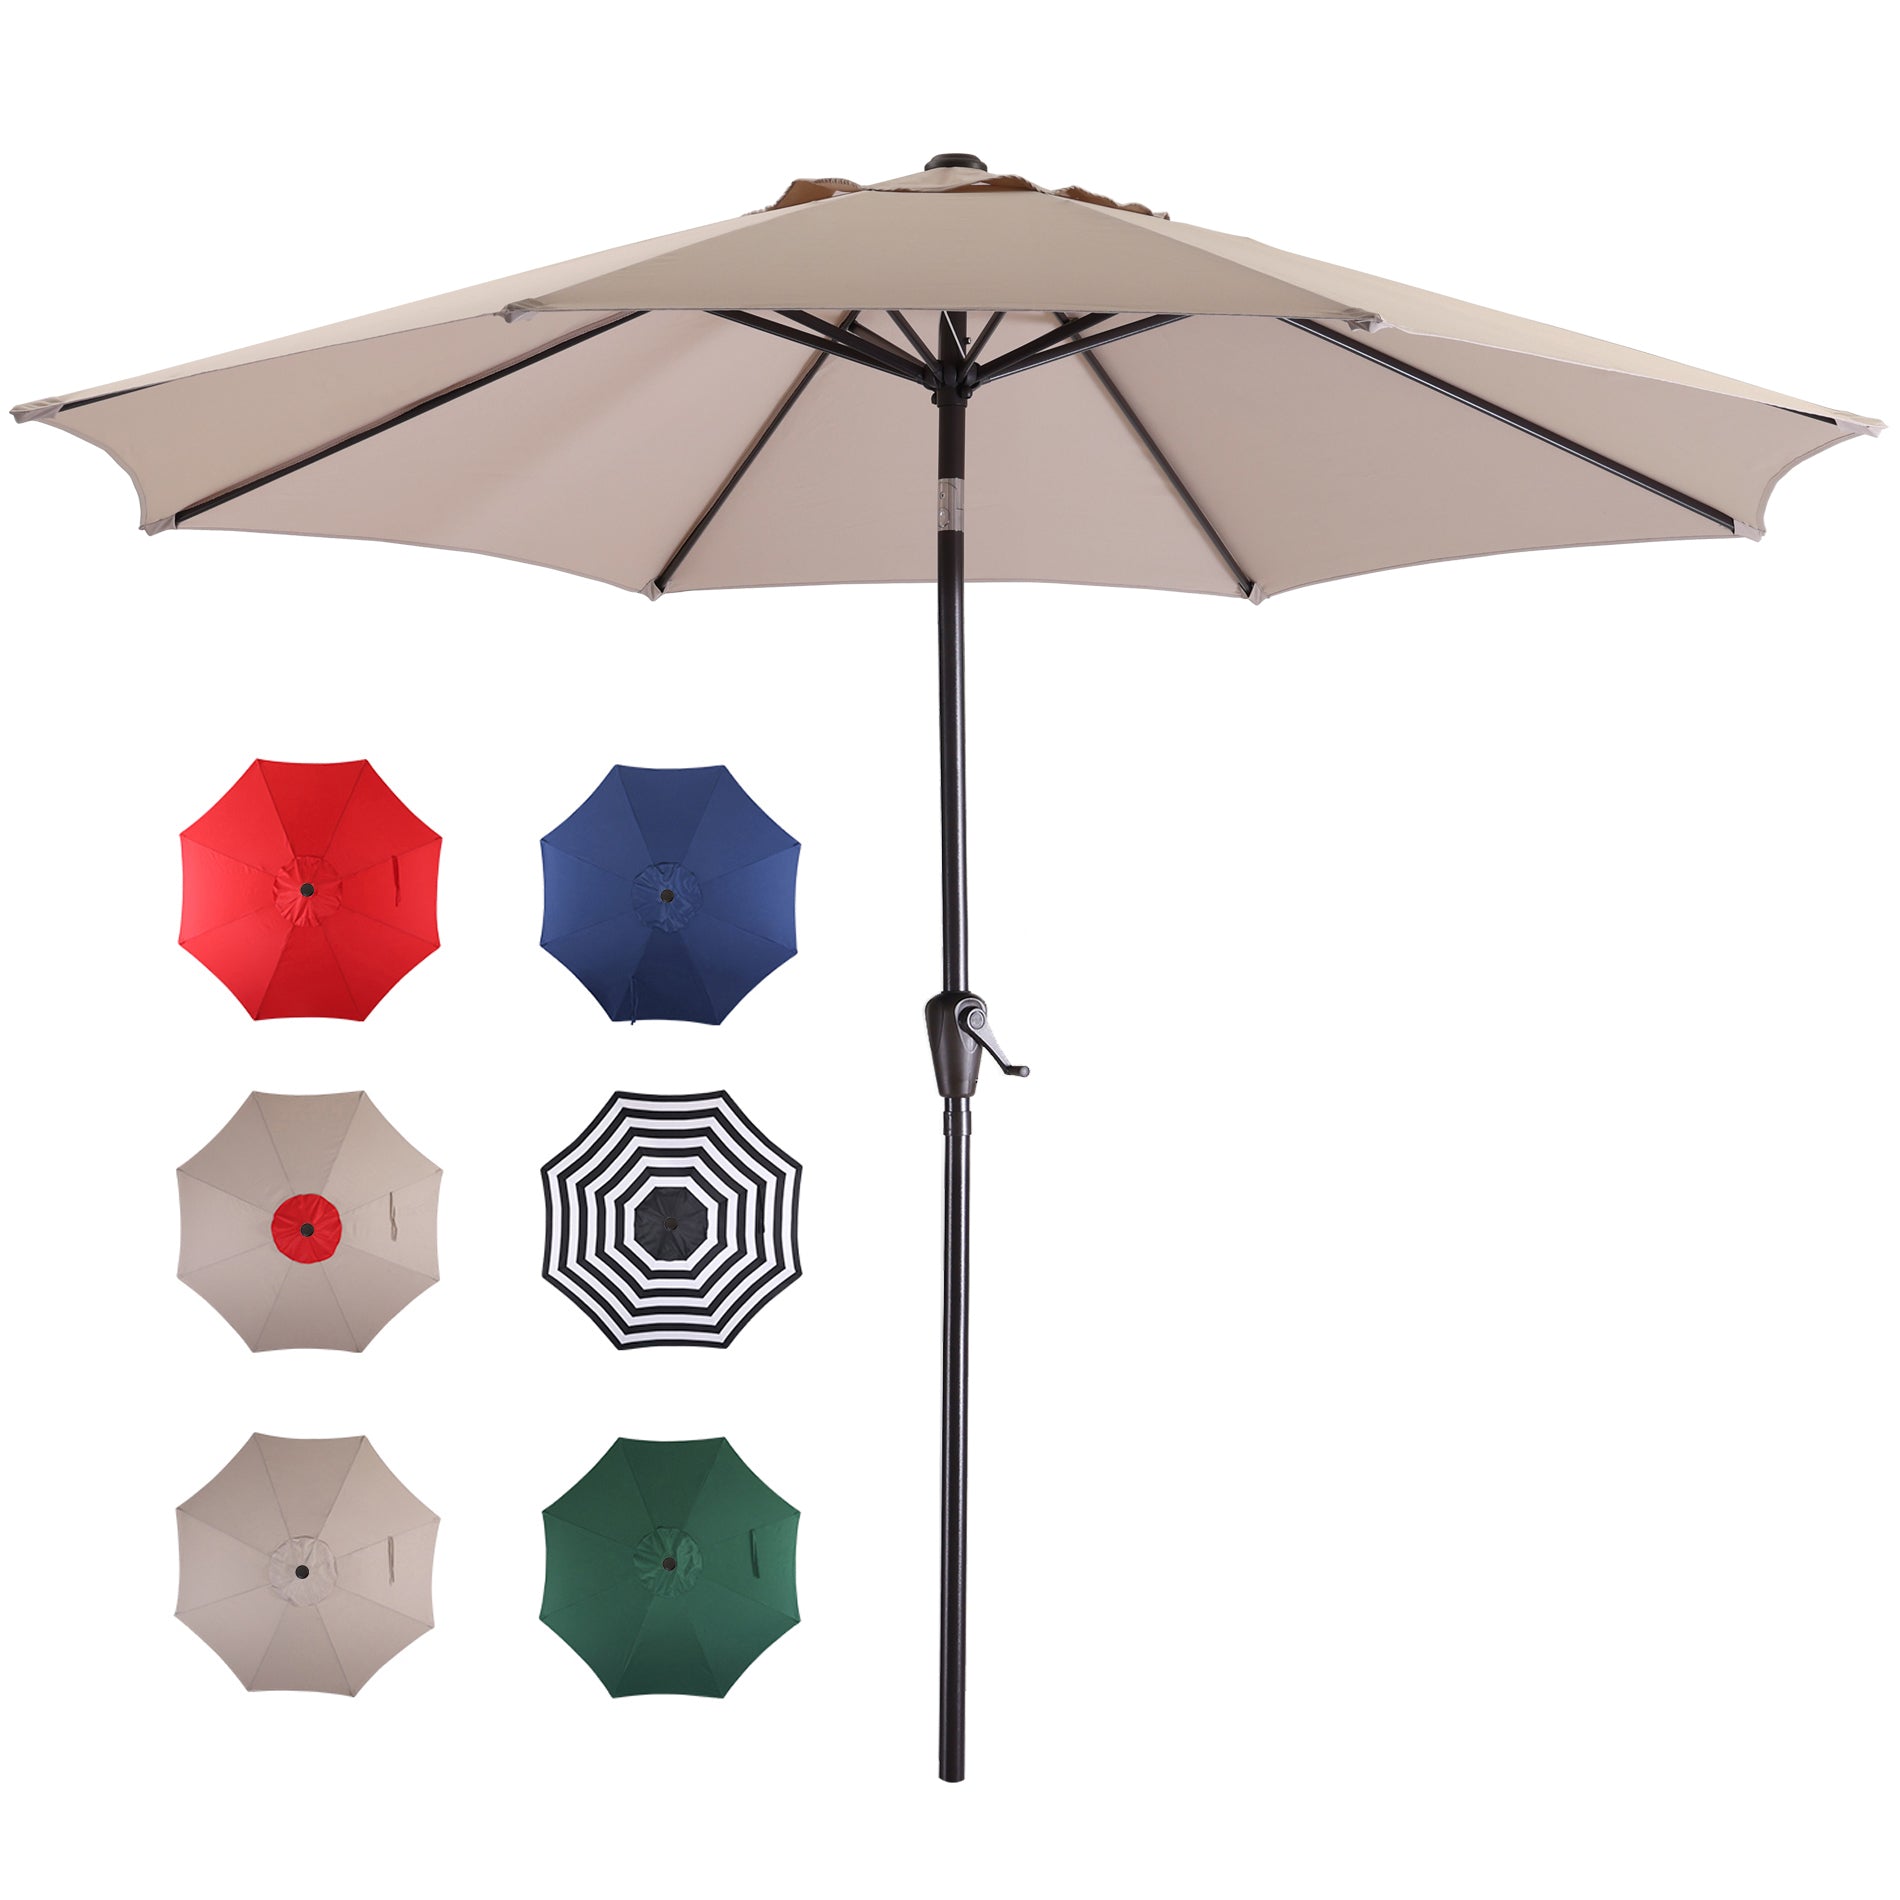 Clihome 9ft Patio Outdoor Table Umbrella with Push Button Tilt and Crank, Market Umbrella with 8 Sturdy Steel Ribs